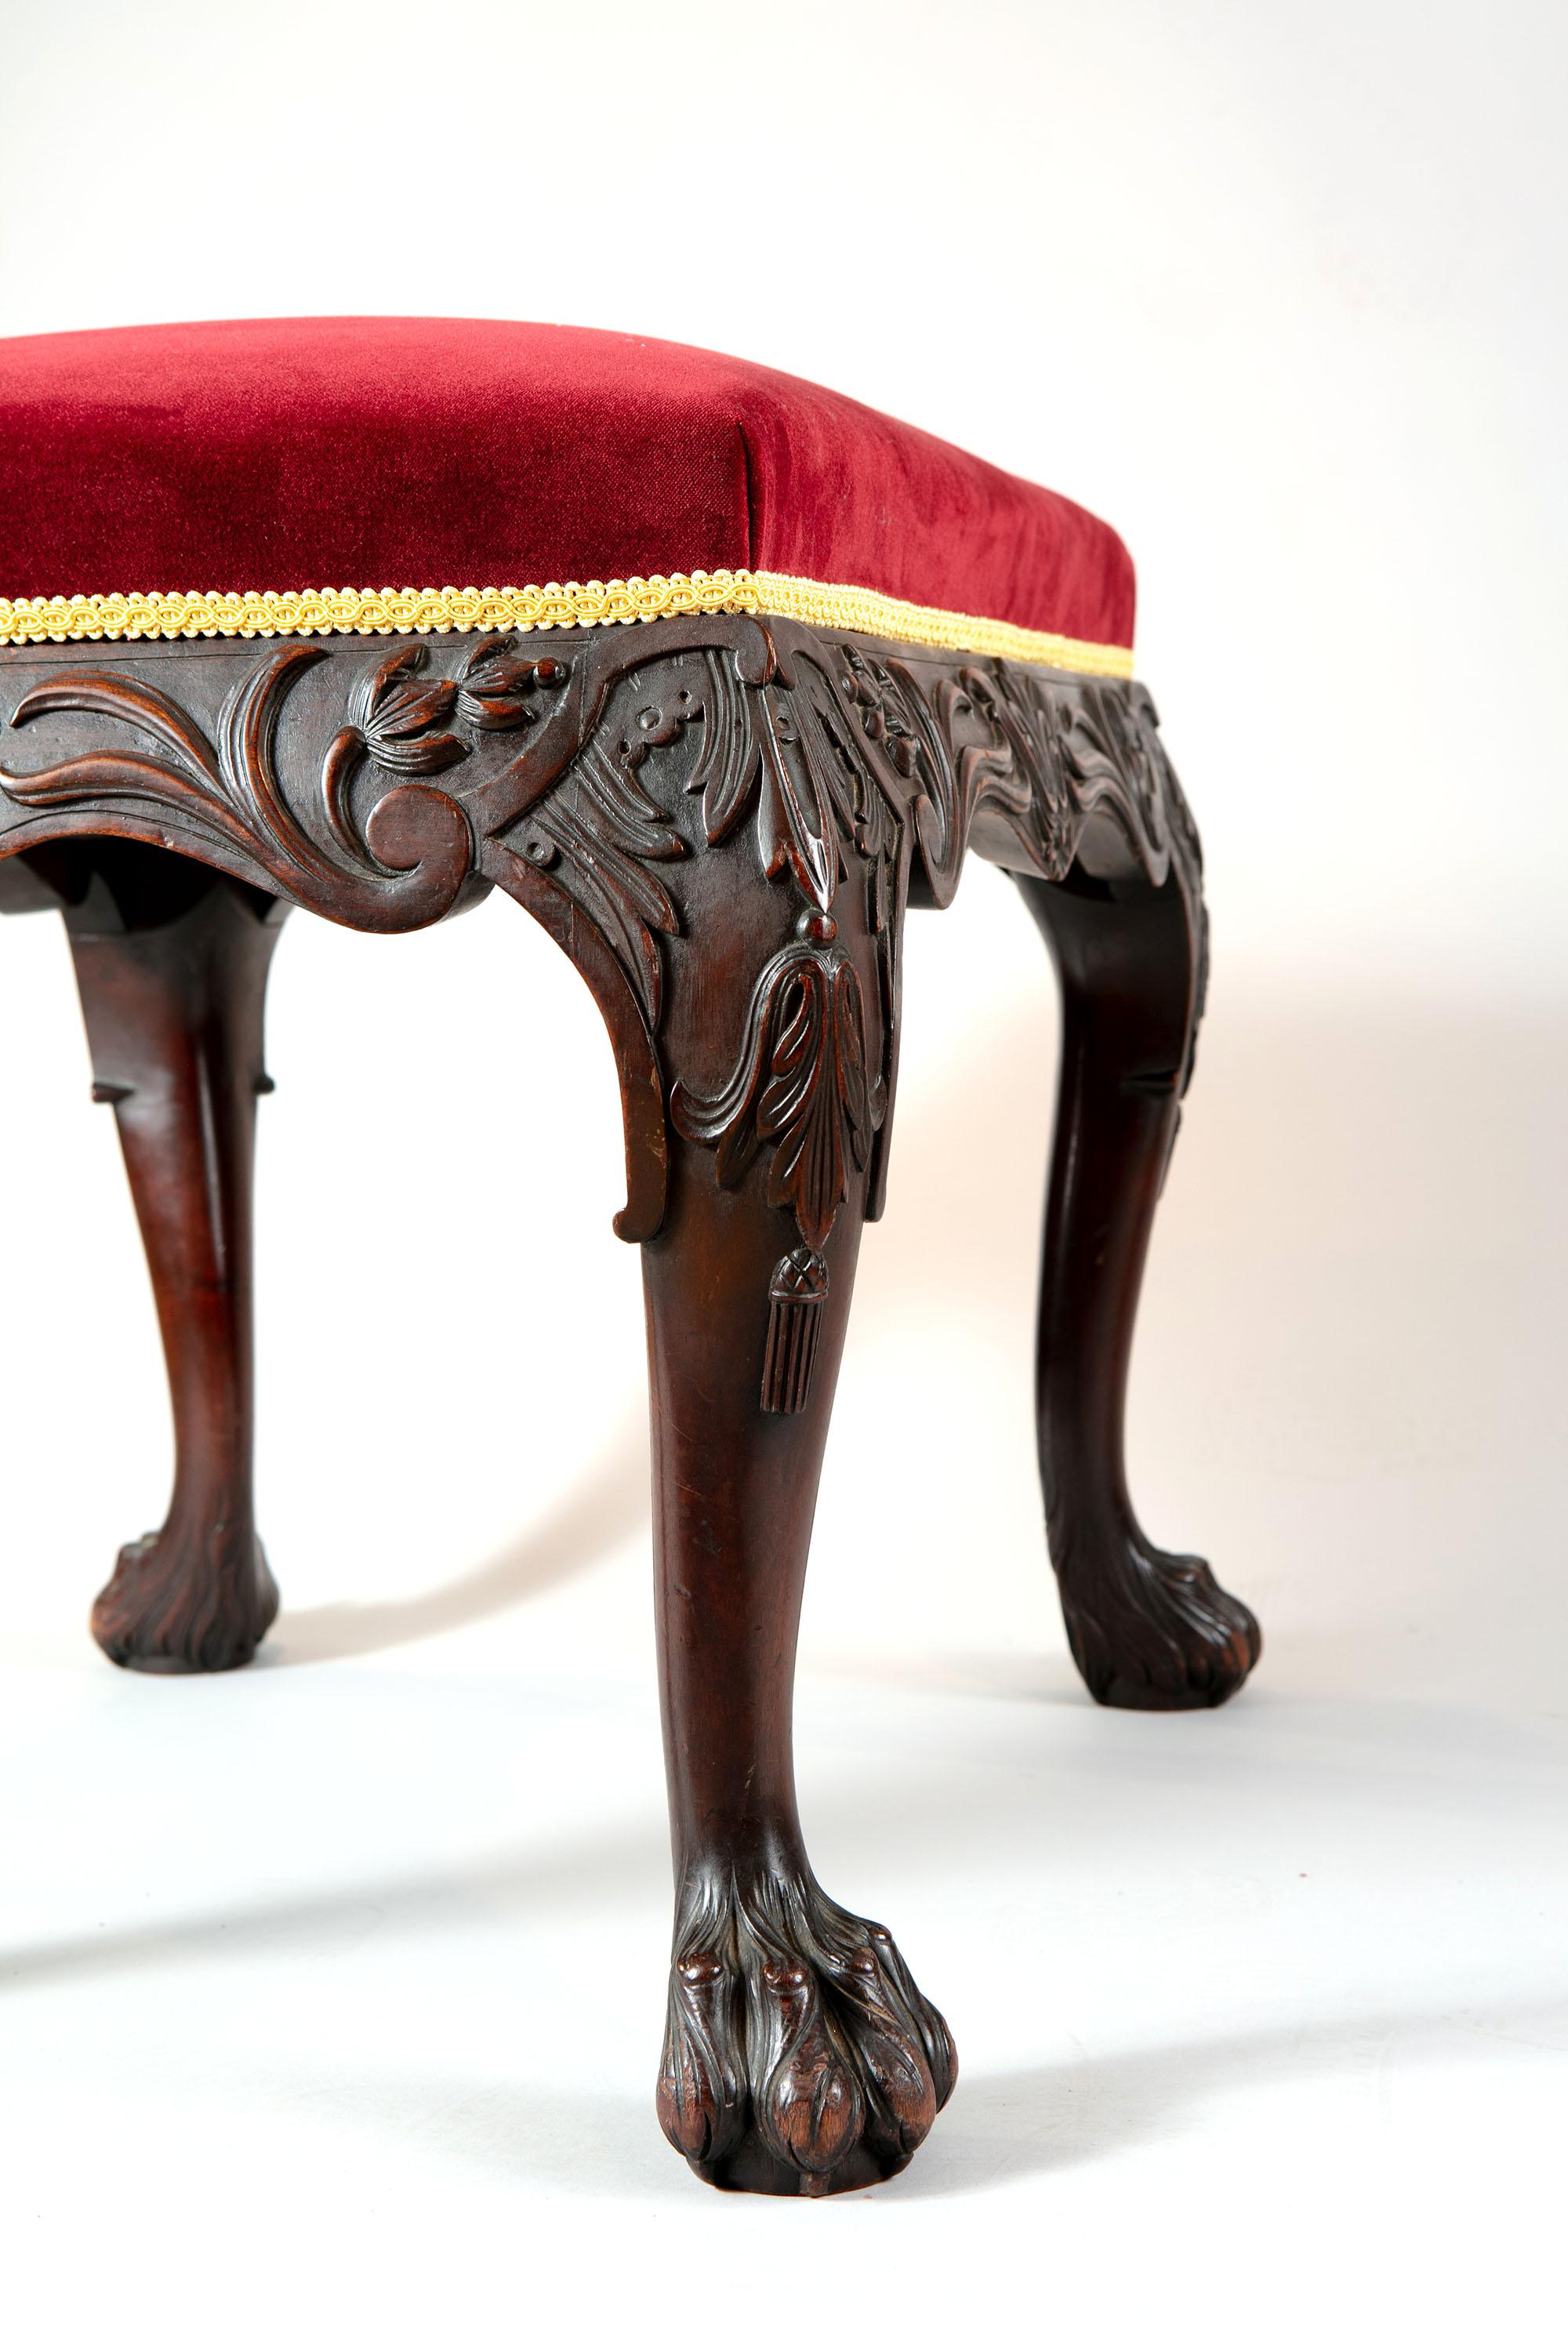 19th Century Carved Mahogany George II Stool In Good Condition For Sale In London, by appointment only